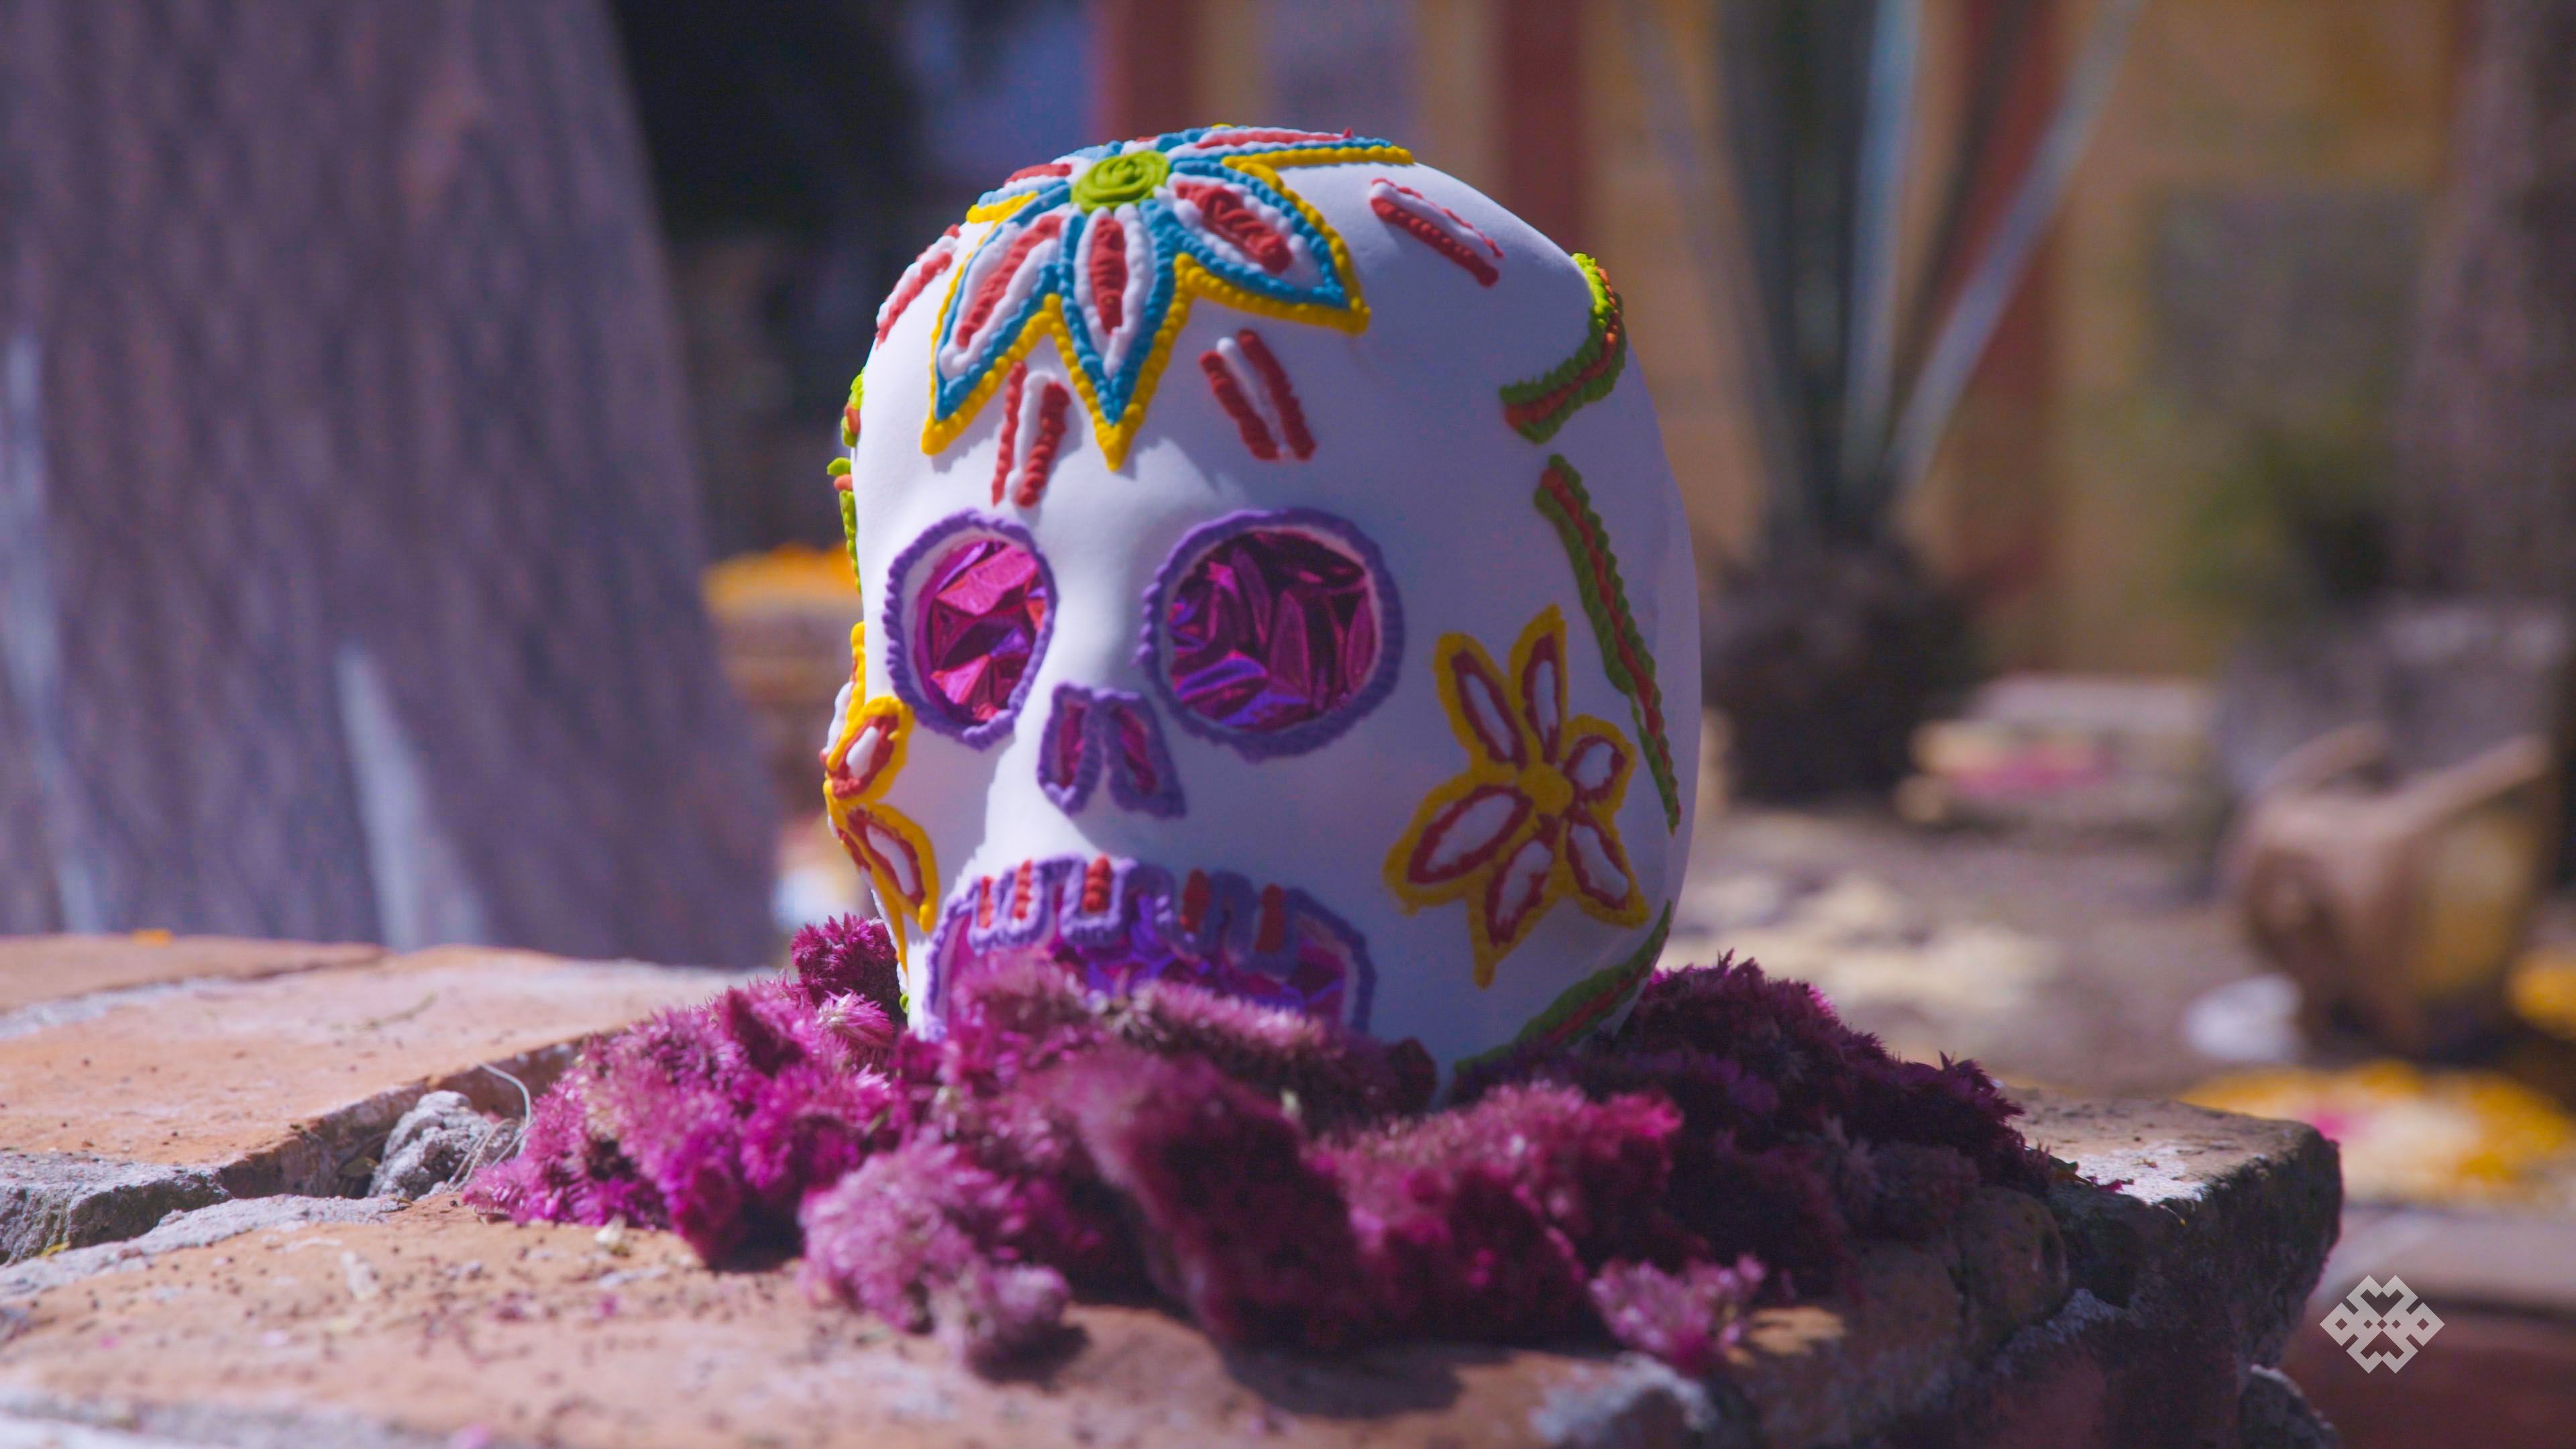 Day of the Dead has everything to do with the afterlife, love and